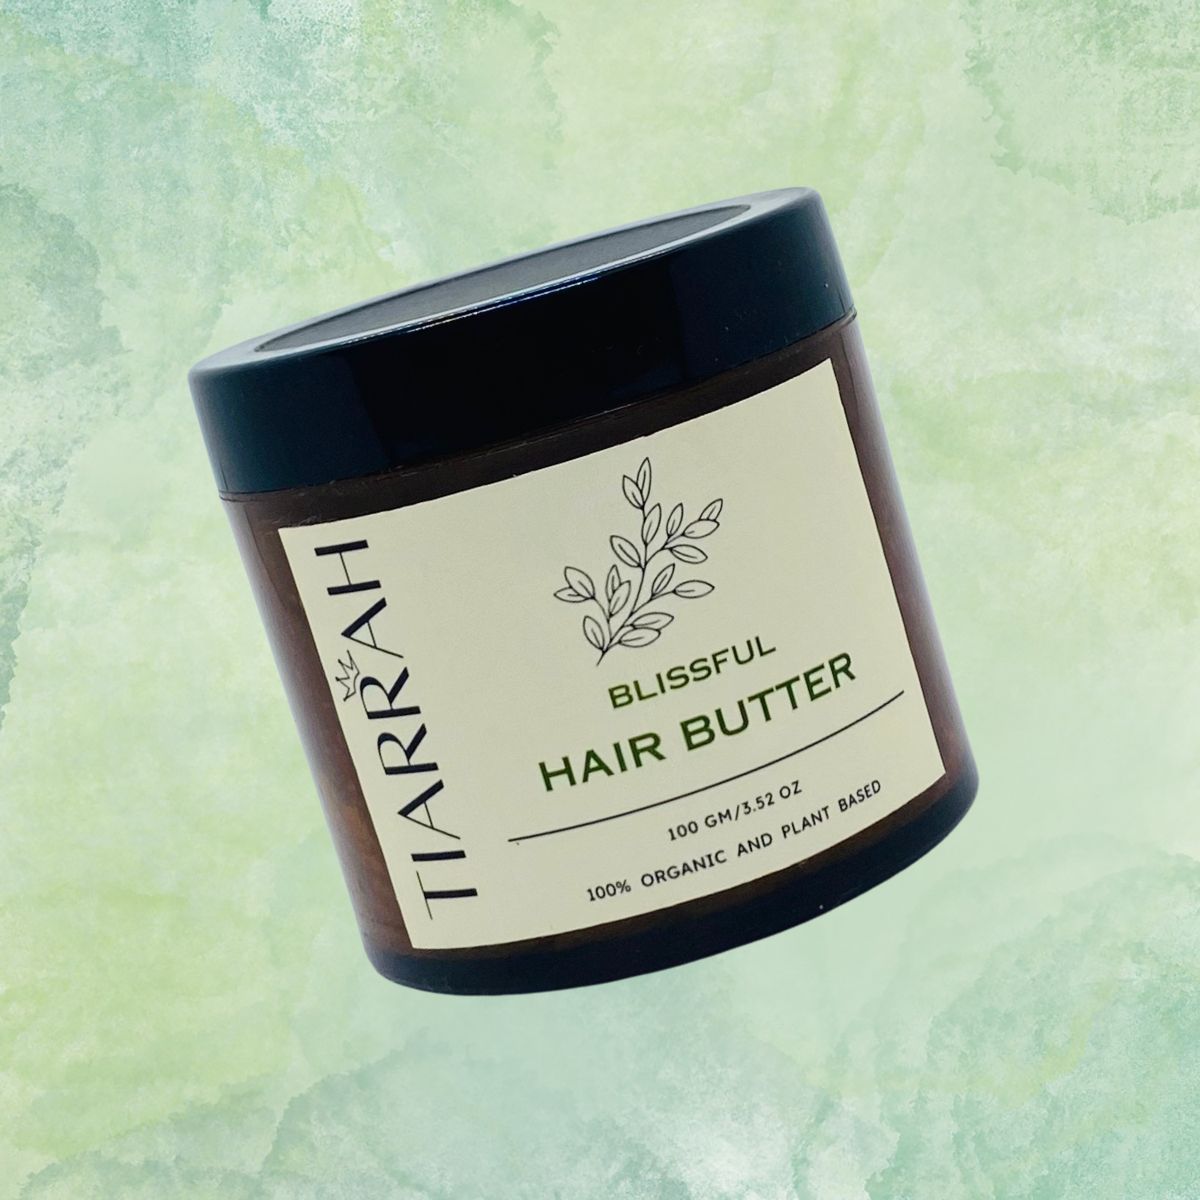 Luxury Hair Butter by Tiarrah: Organic, Non-Toxic - The Luxury Bath and Body Care Shop